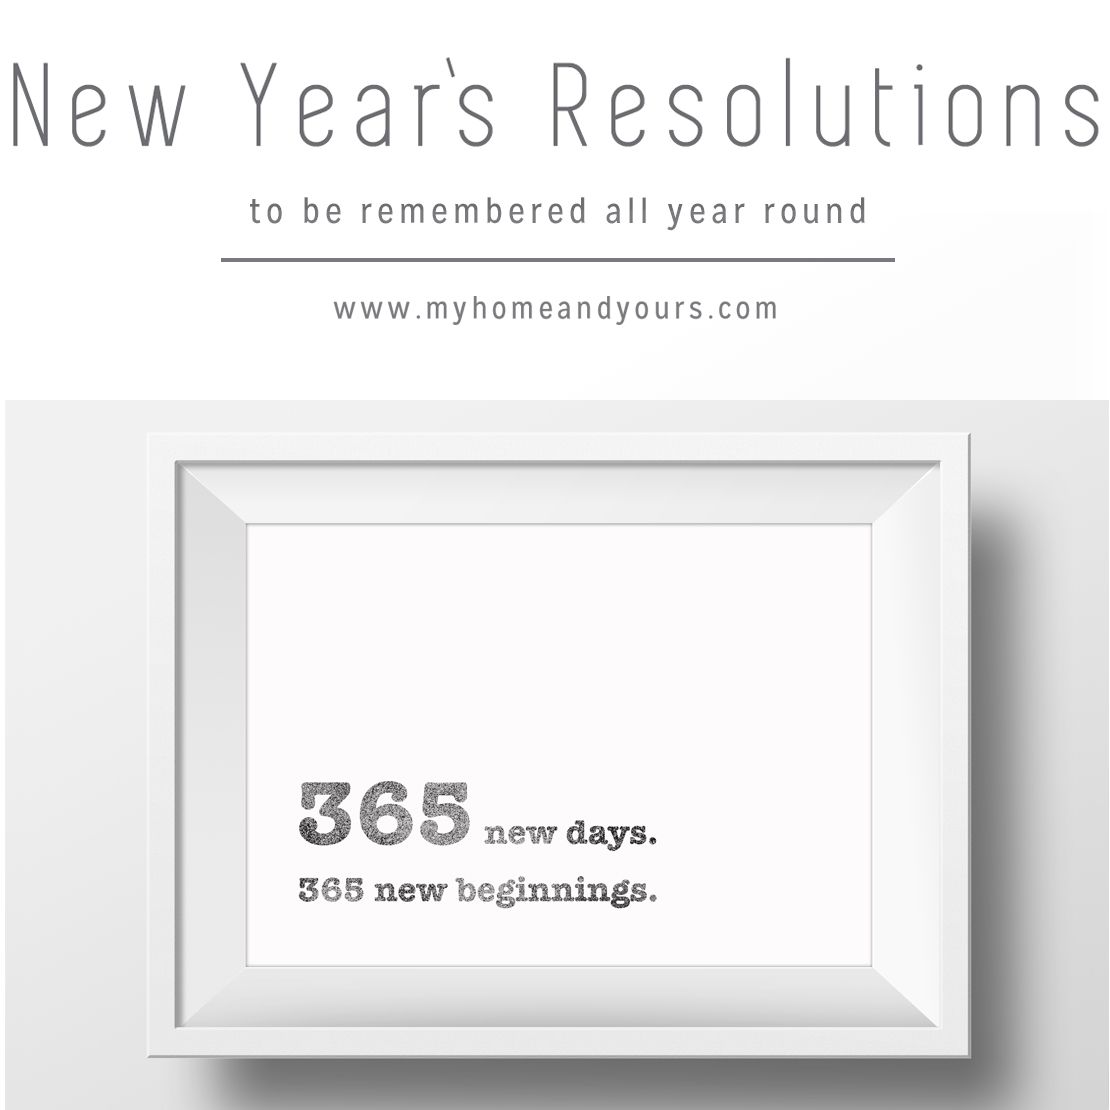 New-Years-Resolutions---to-be-remembered-all-year-round-by-my-home-and-yours-blog-s